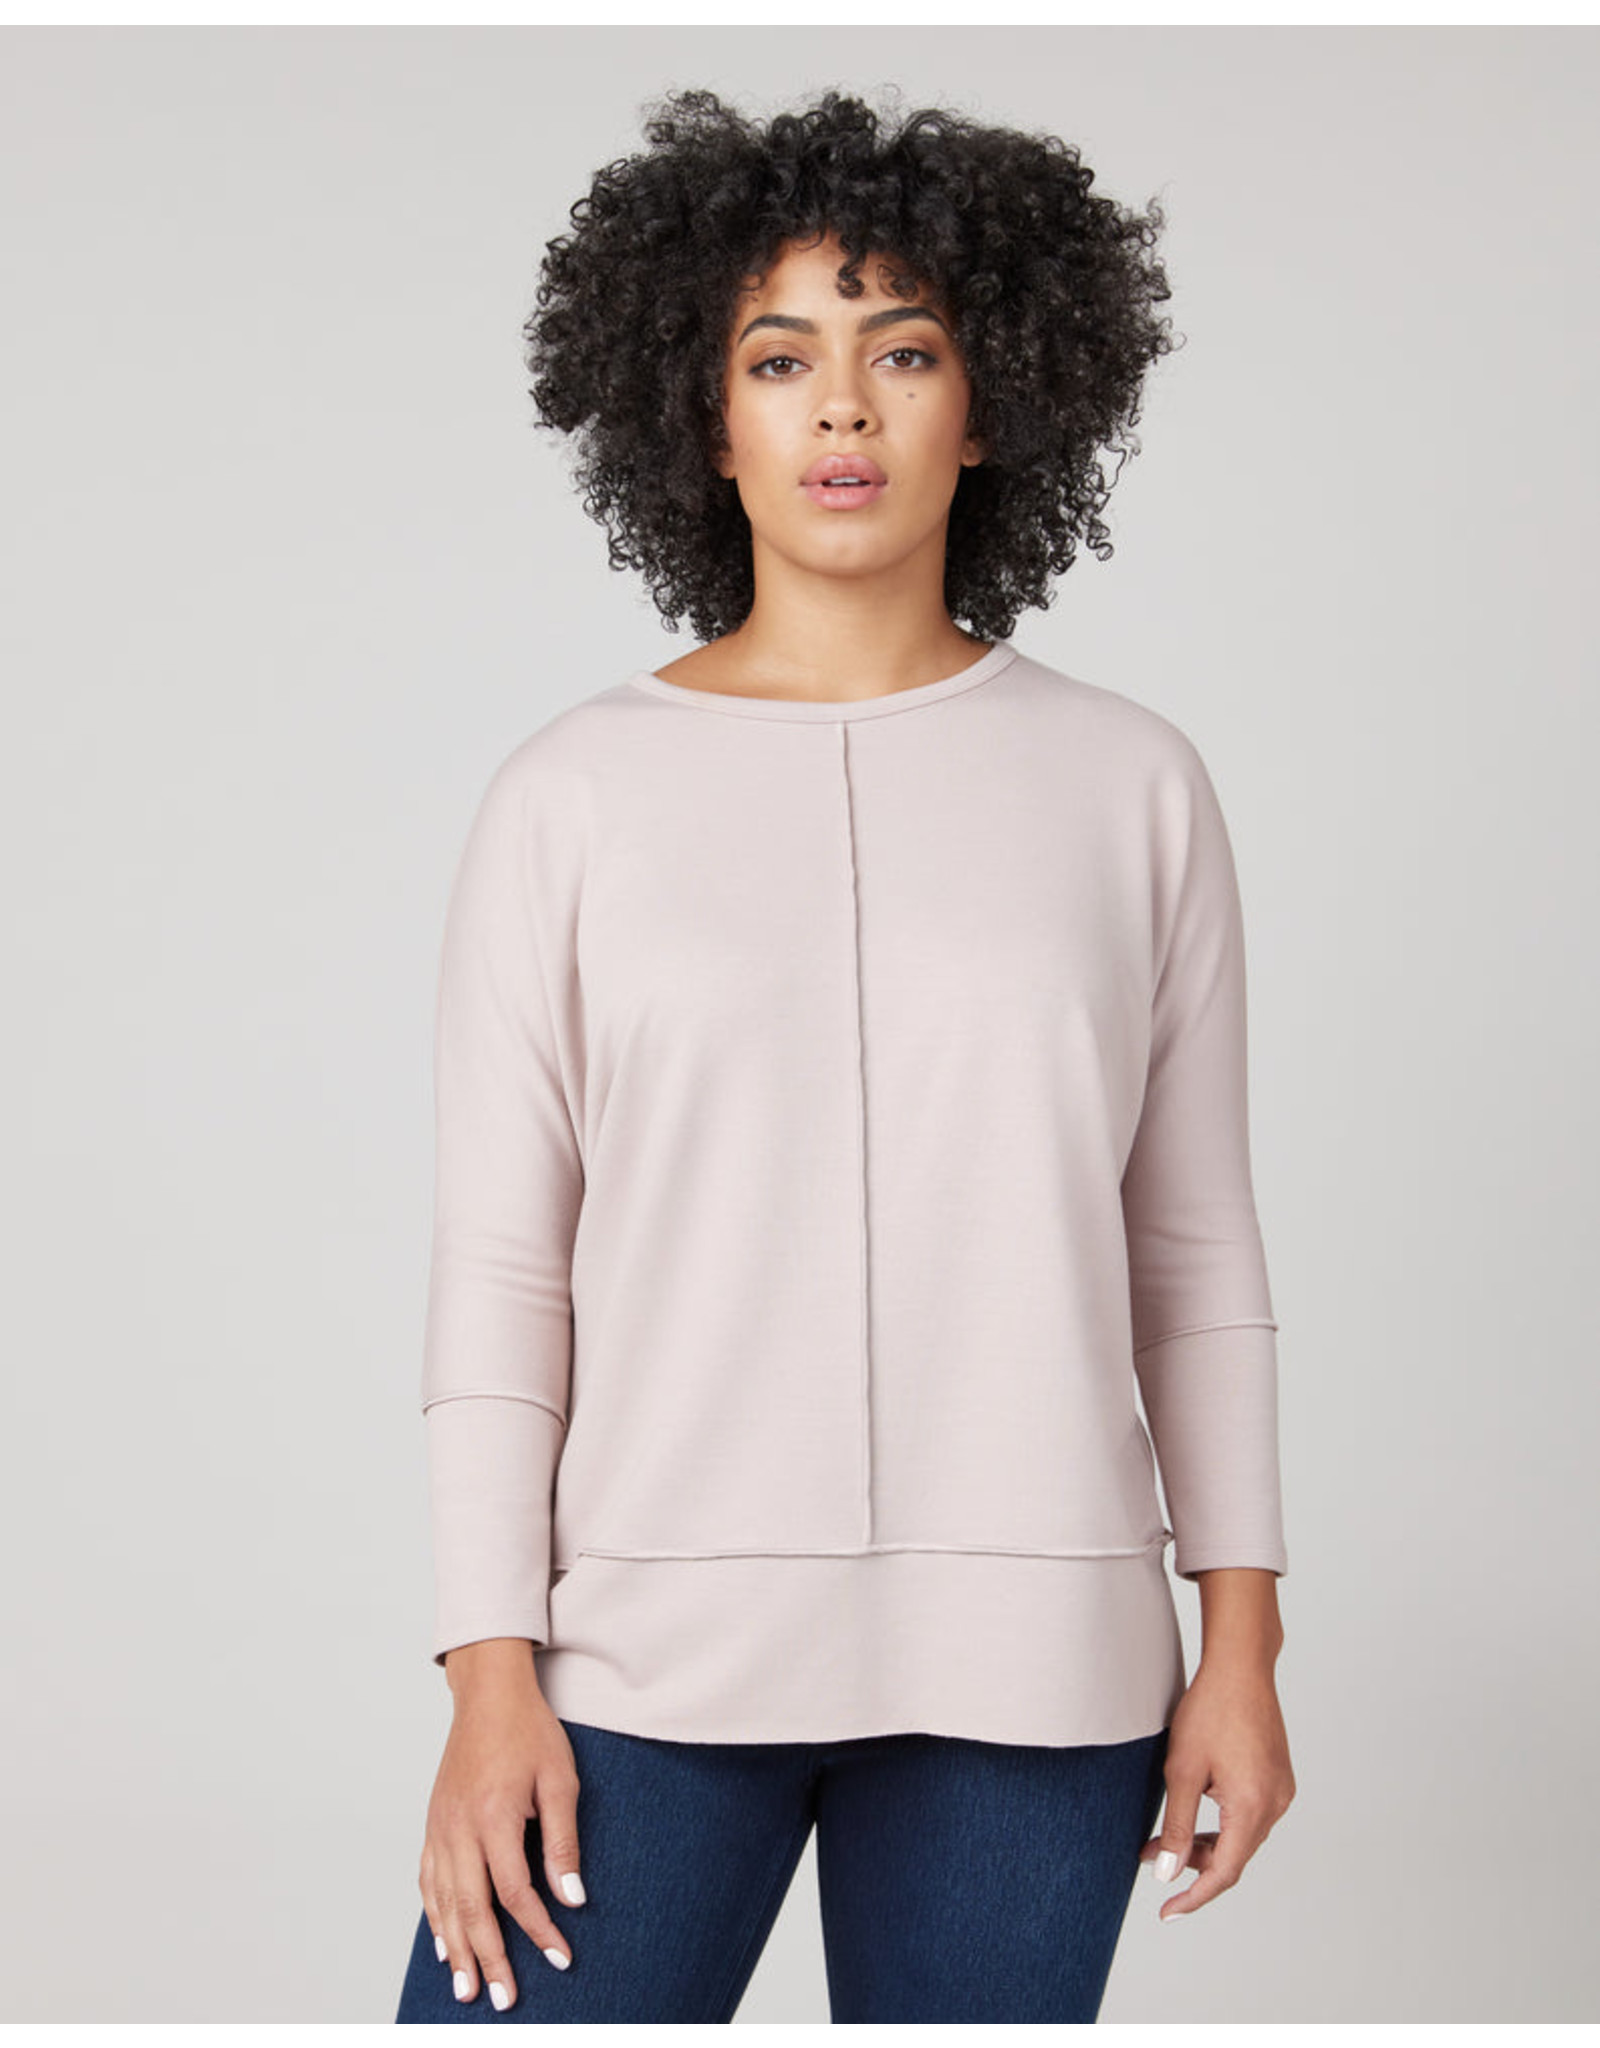 Perfect Length Top Dolman Sweatshirt - Southern Accents Boutique